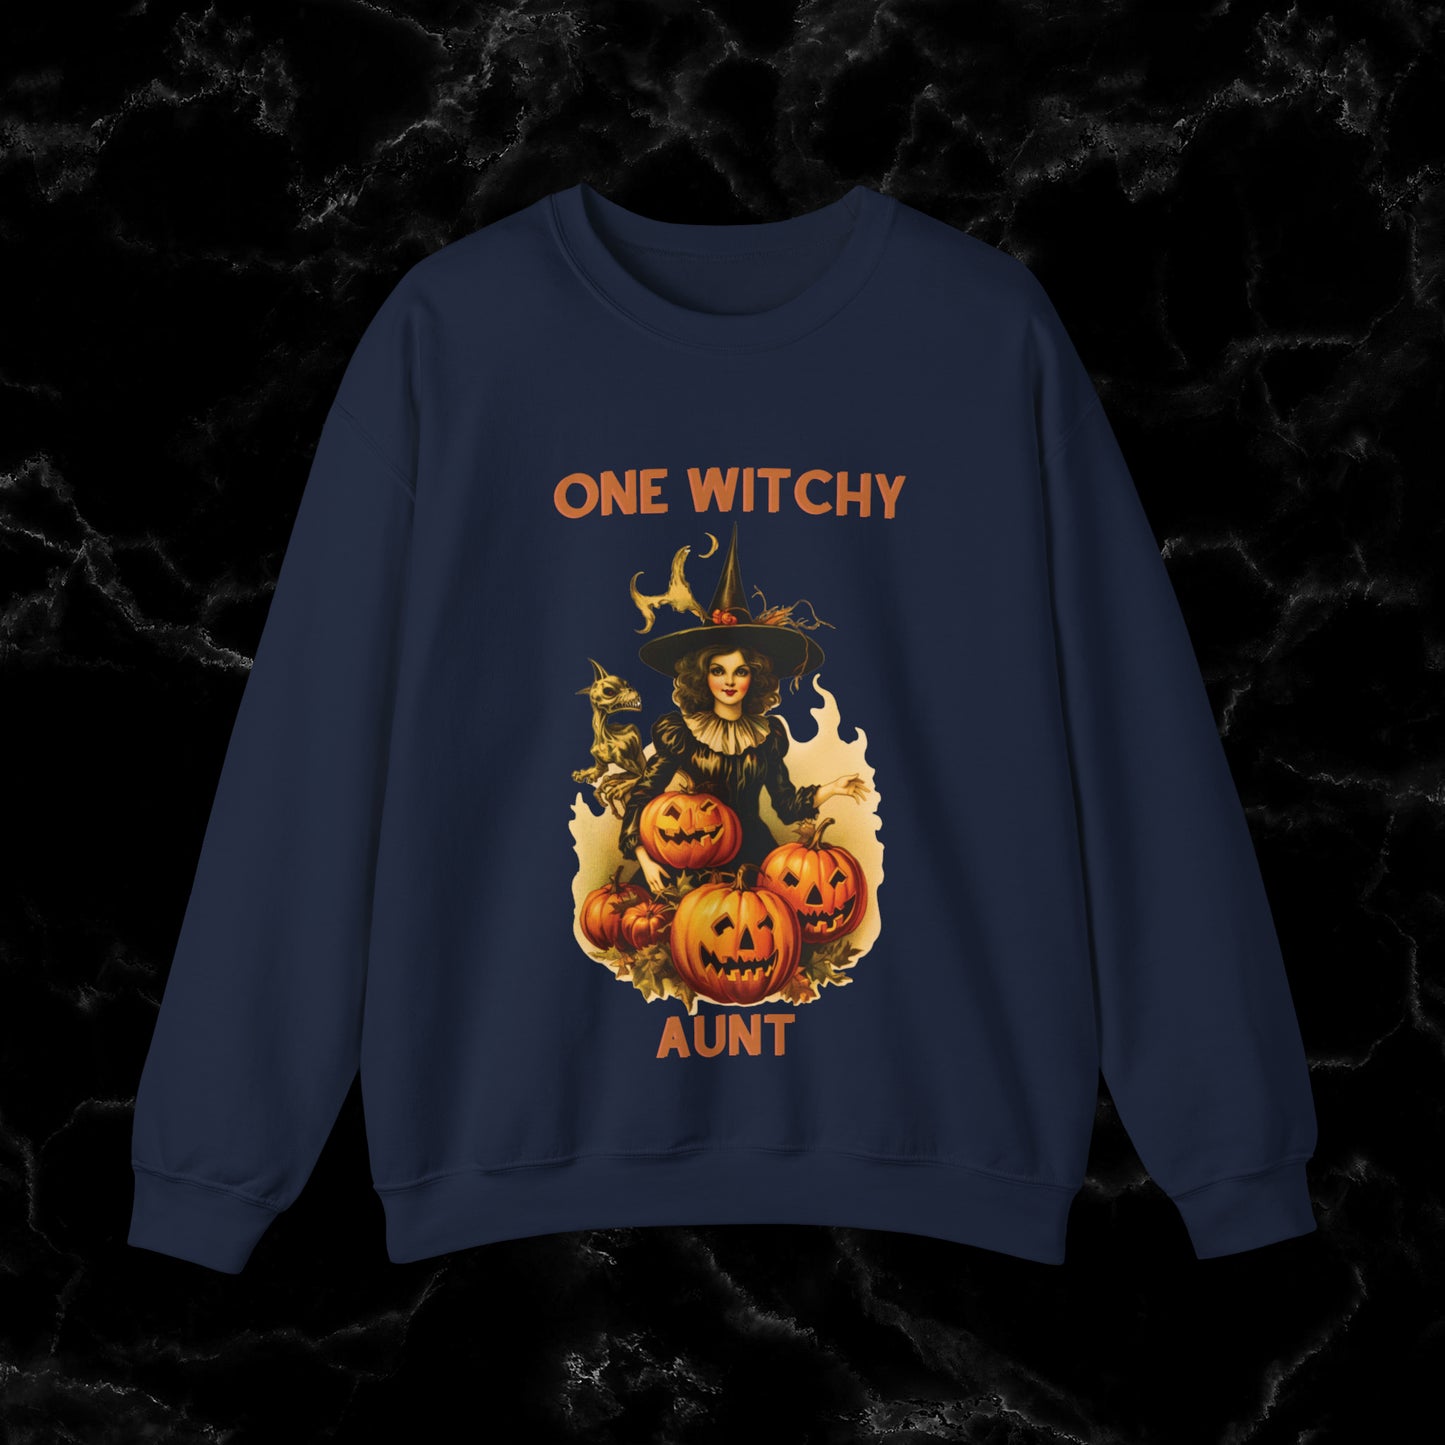 One Witchy Aunt Sweatshirt - Cool Aunt Shirt, Feral Aunt Sweatshirt, Perfect Gifts for Aunts, Auntie Sweatshirt Sweatshirt S Navy 